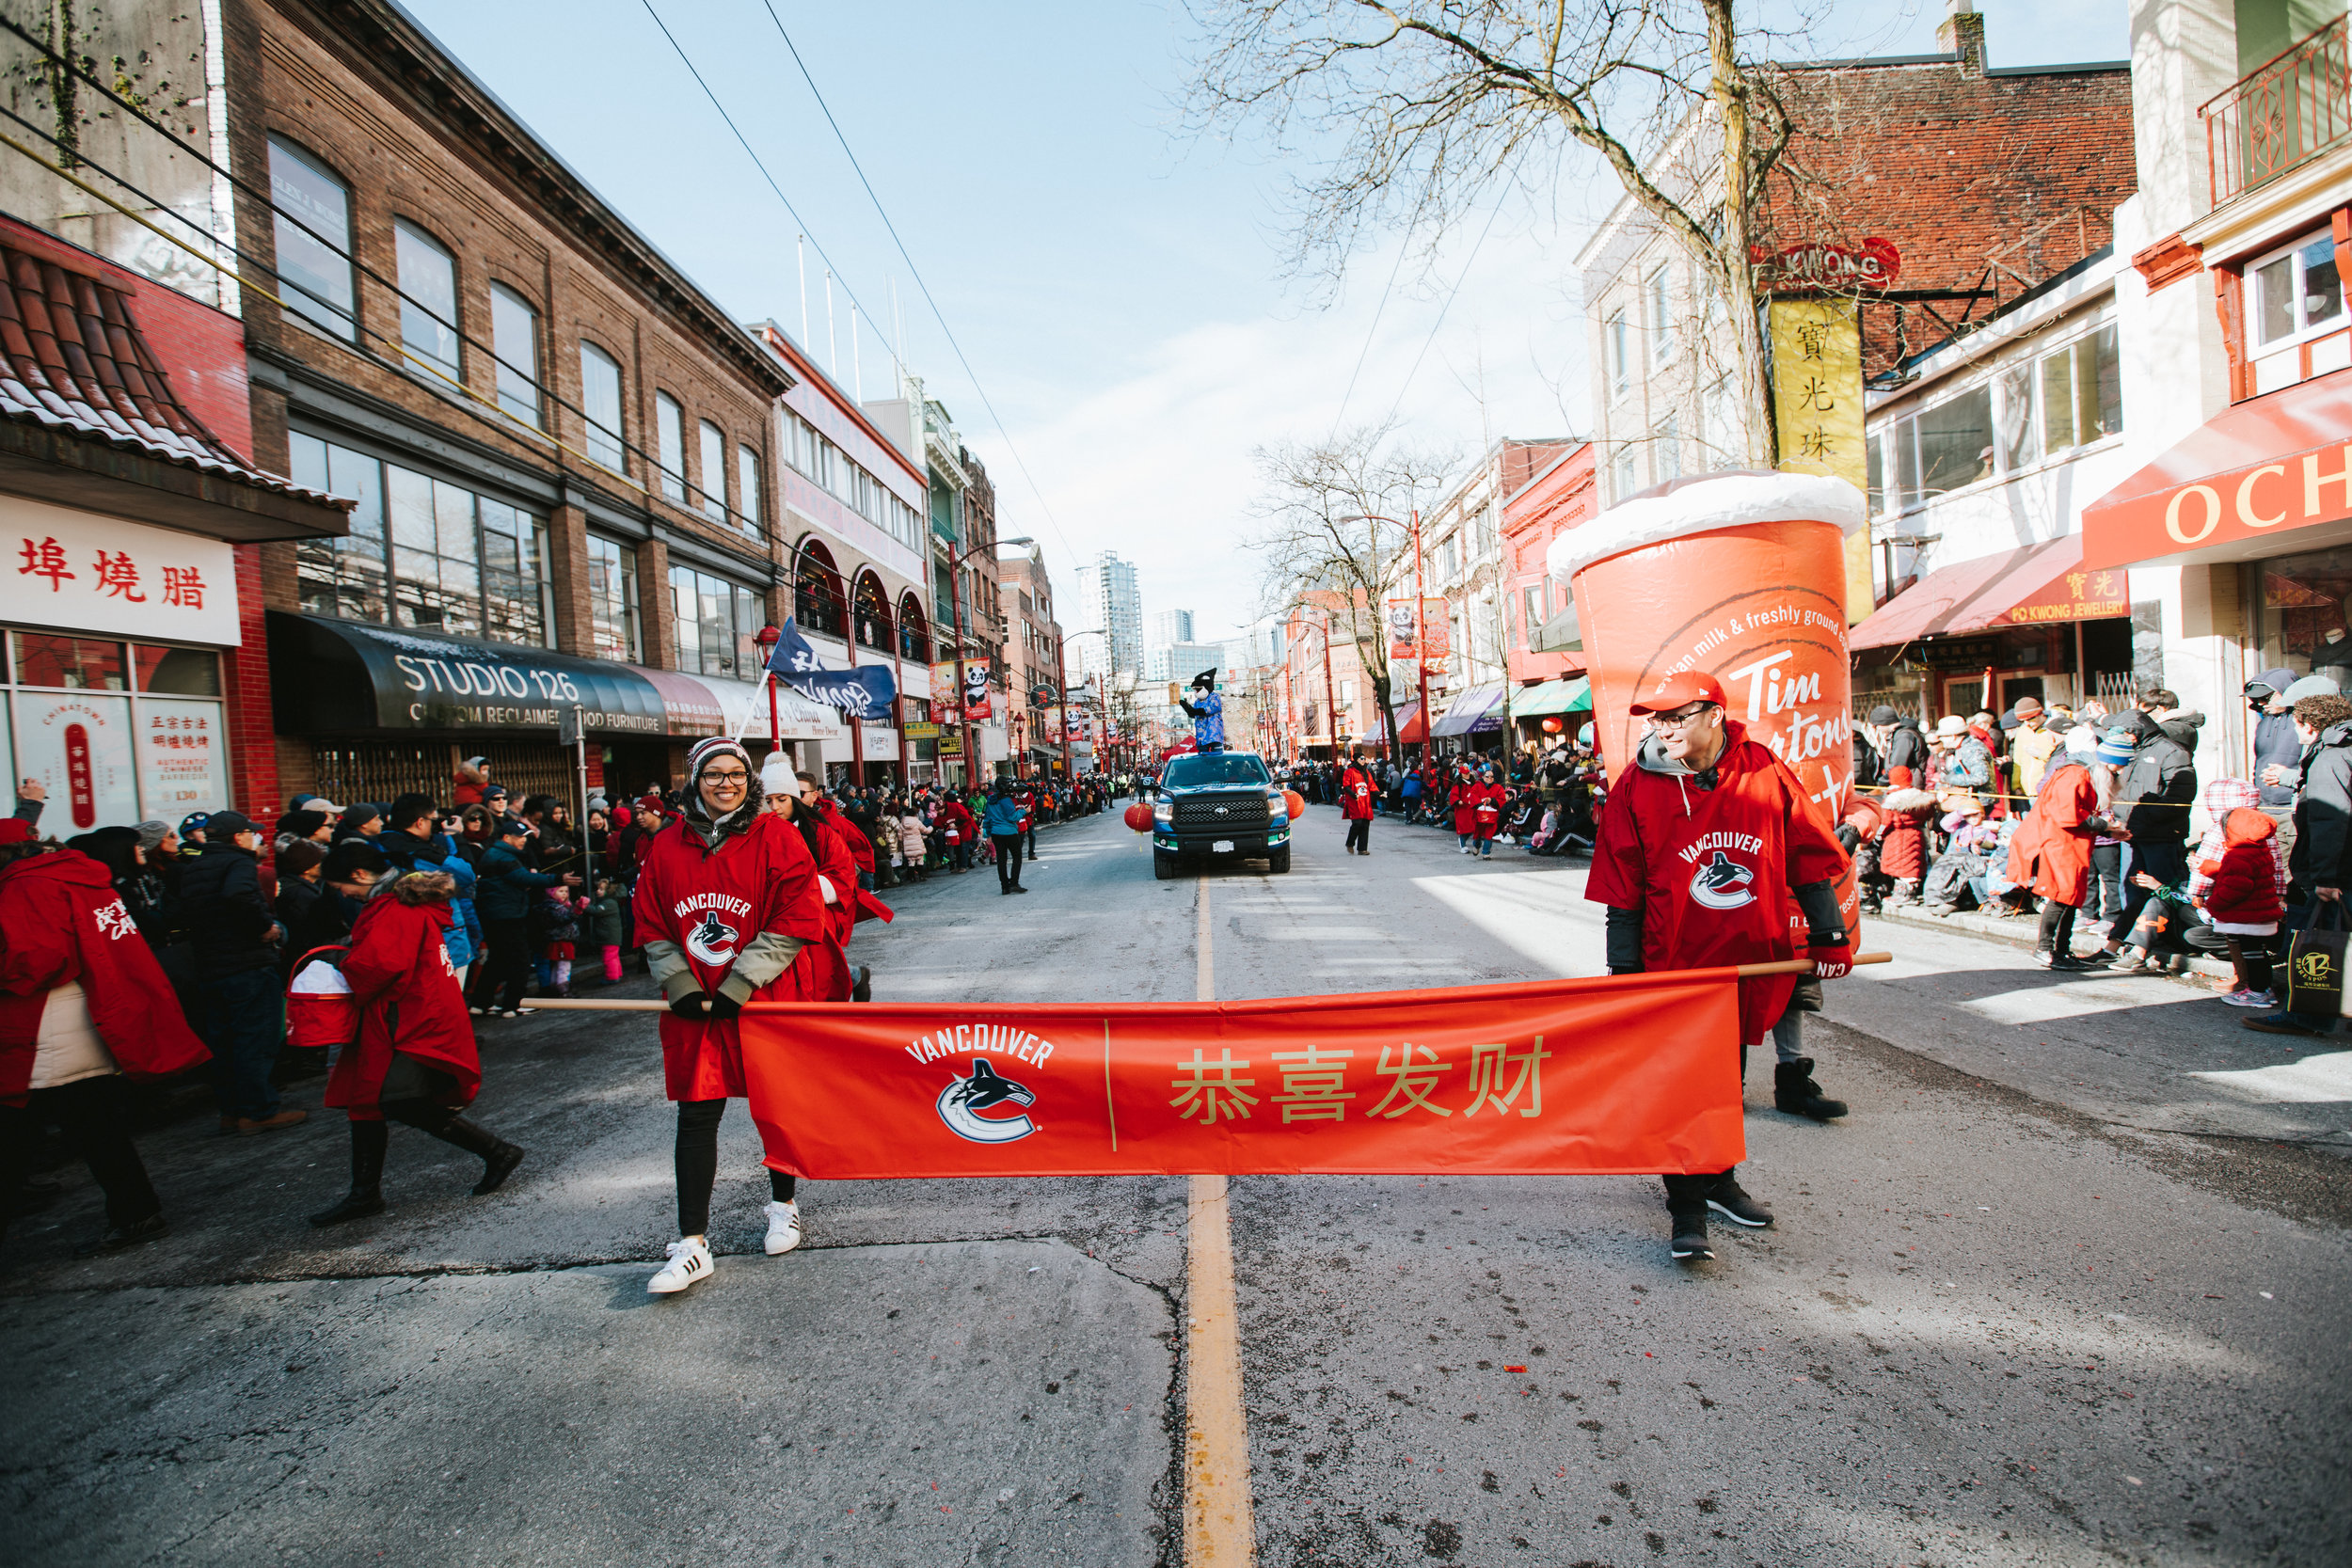 Canucks to celebrate Lunar New Year, Vaisakhi, and other special